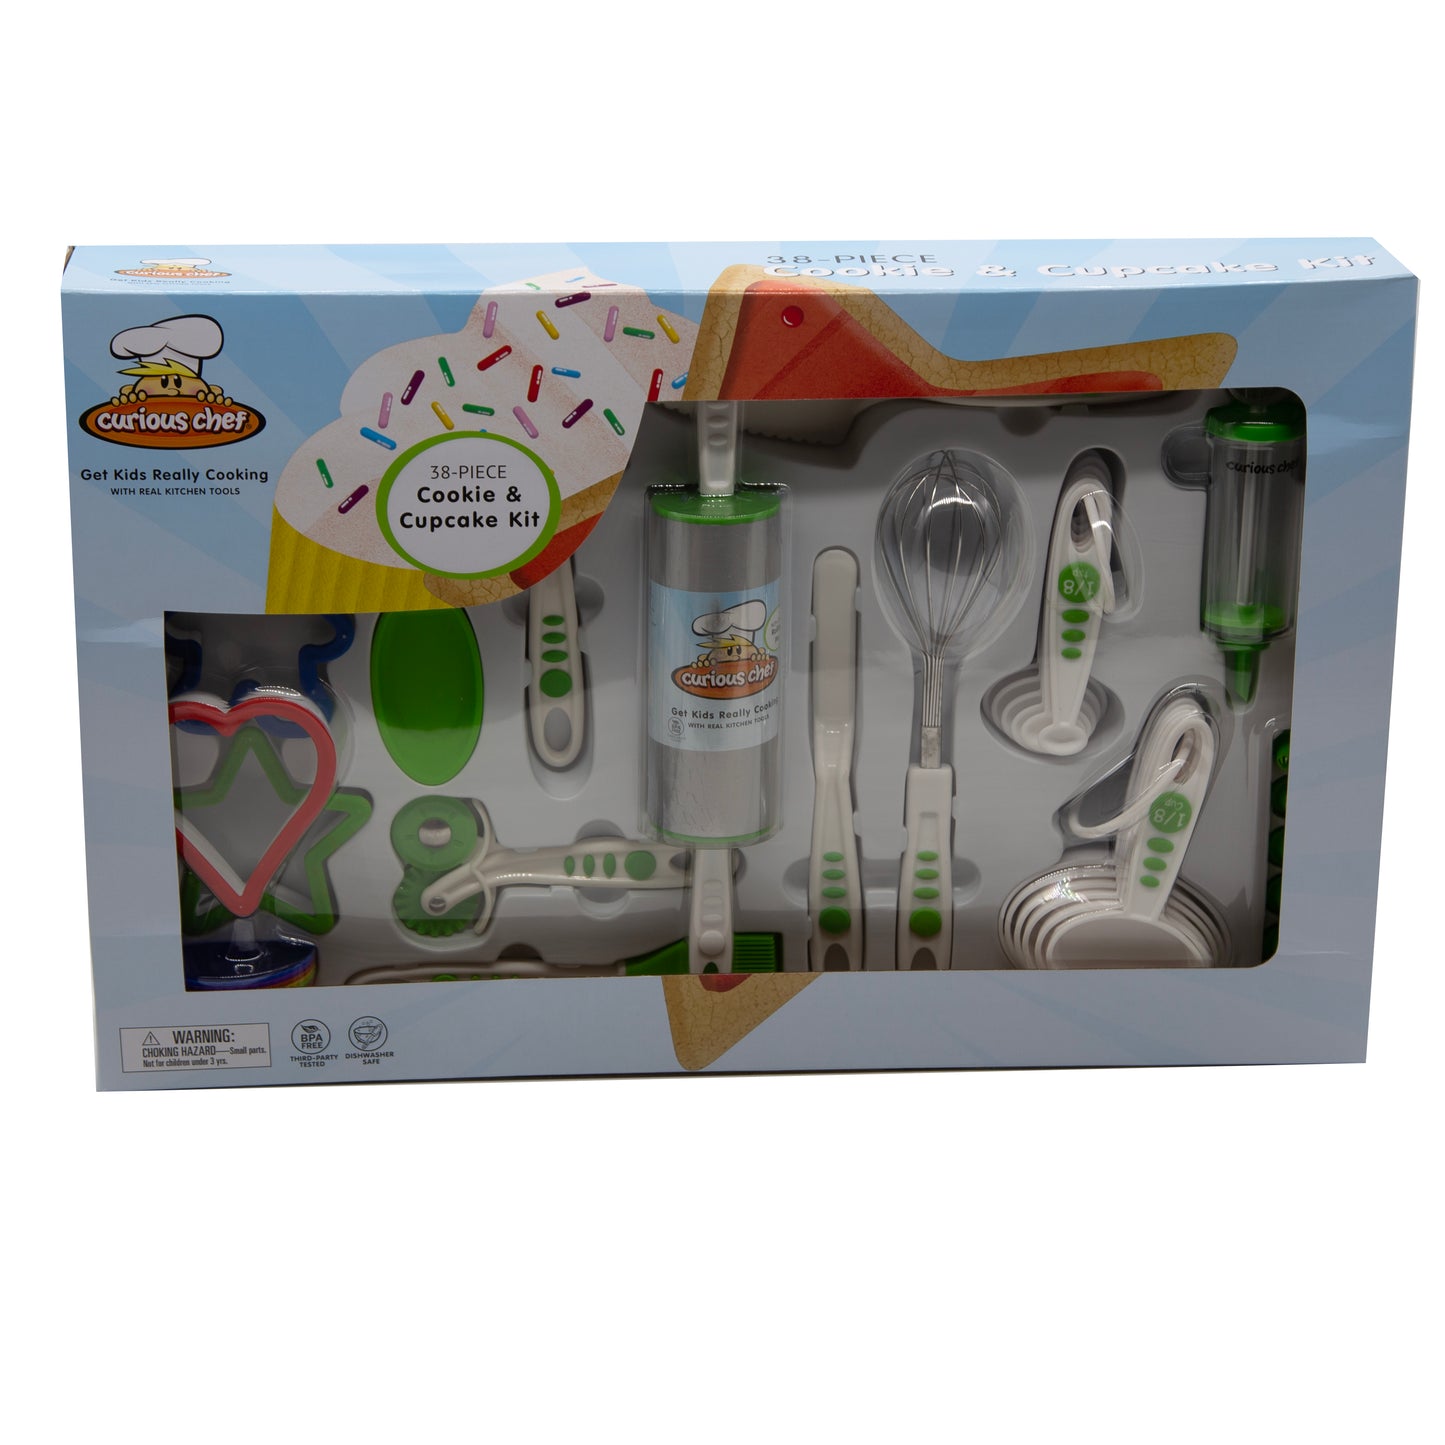 Curious Chef 38 pc Cookie & Cupcake Kit